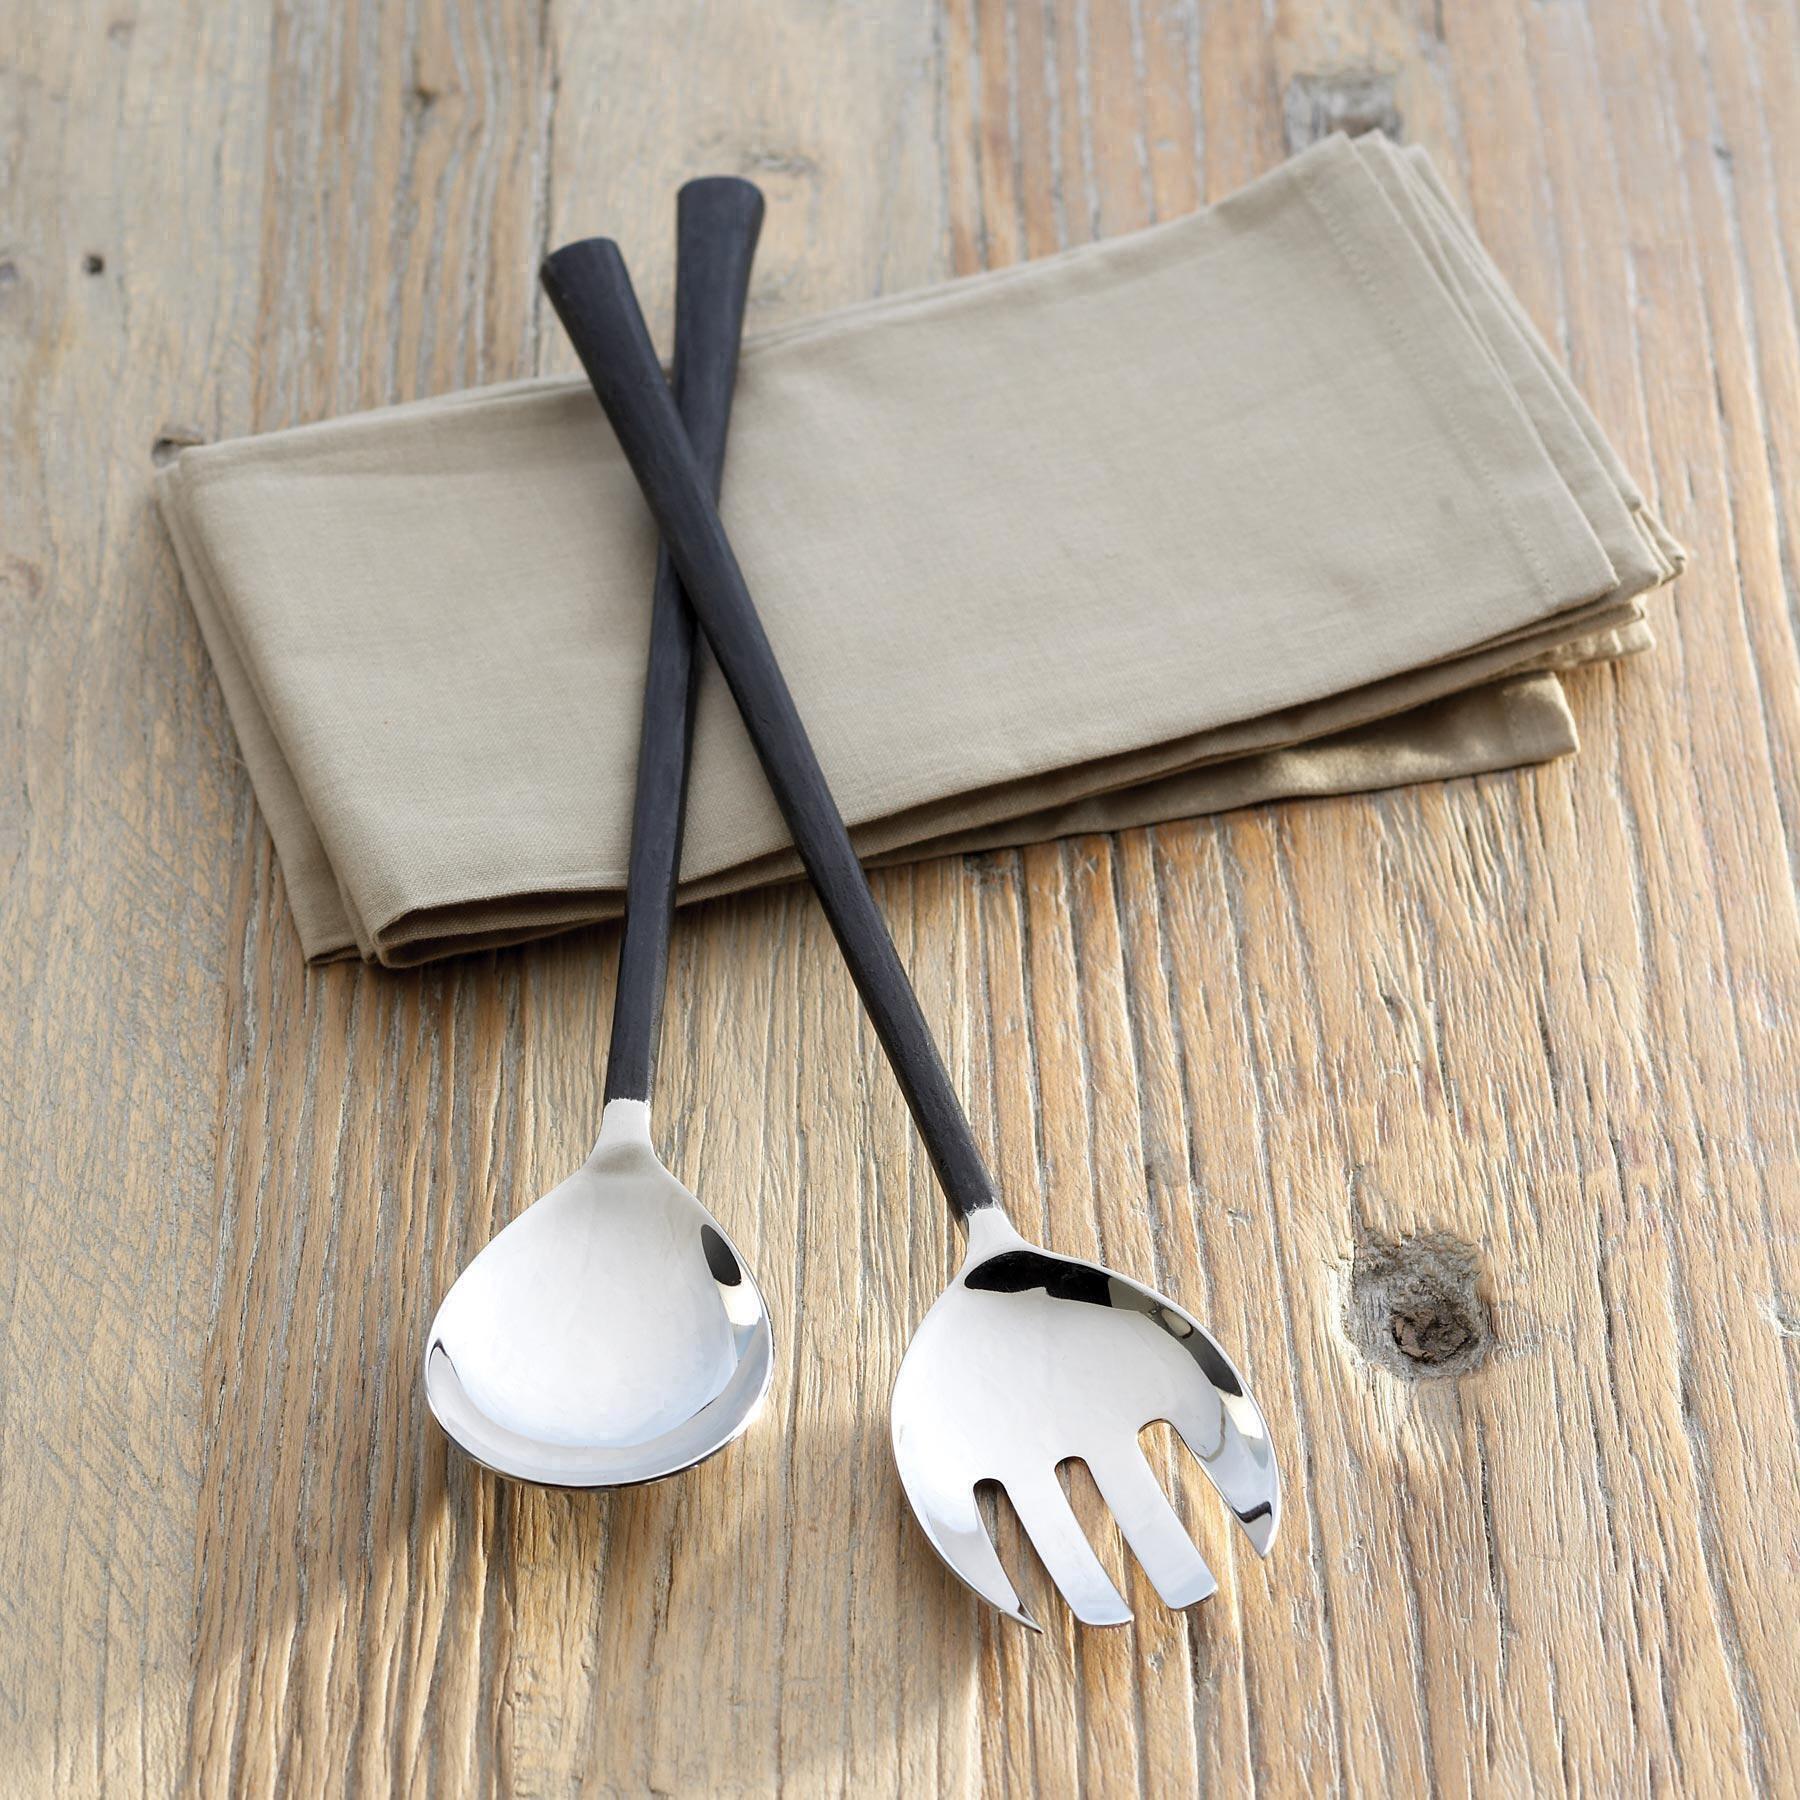 4-Piece Cheese Knife Set – JNJ Gifts and More